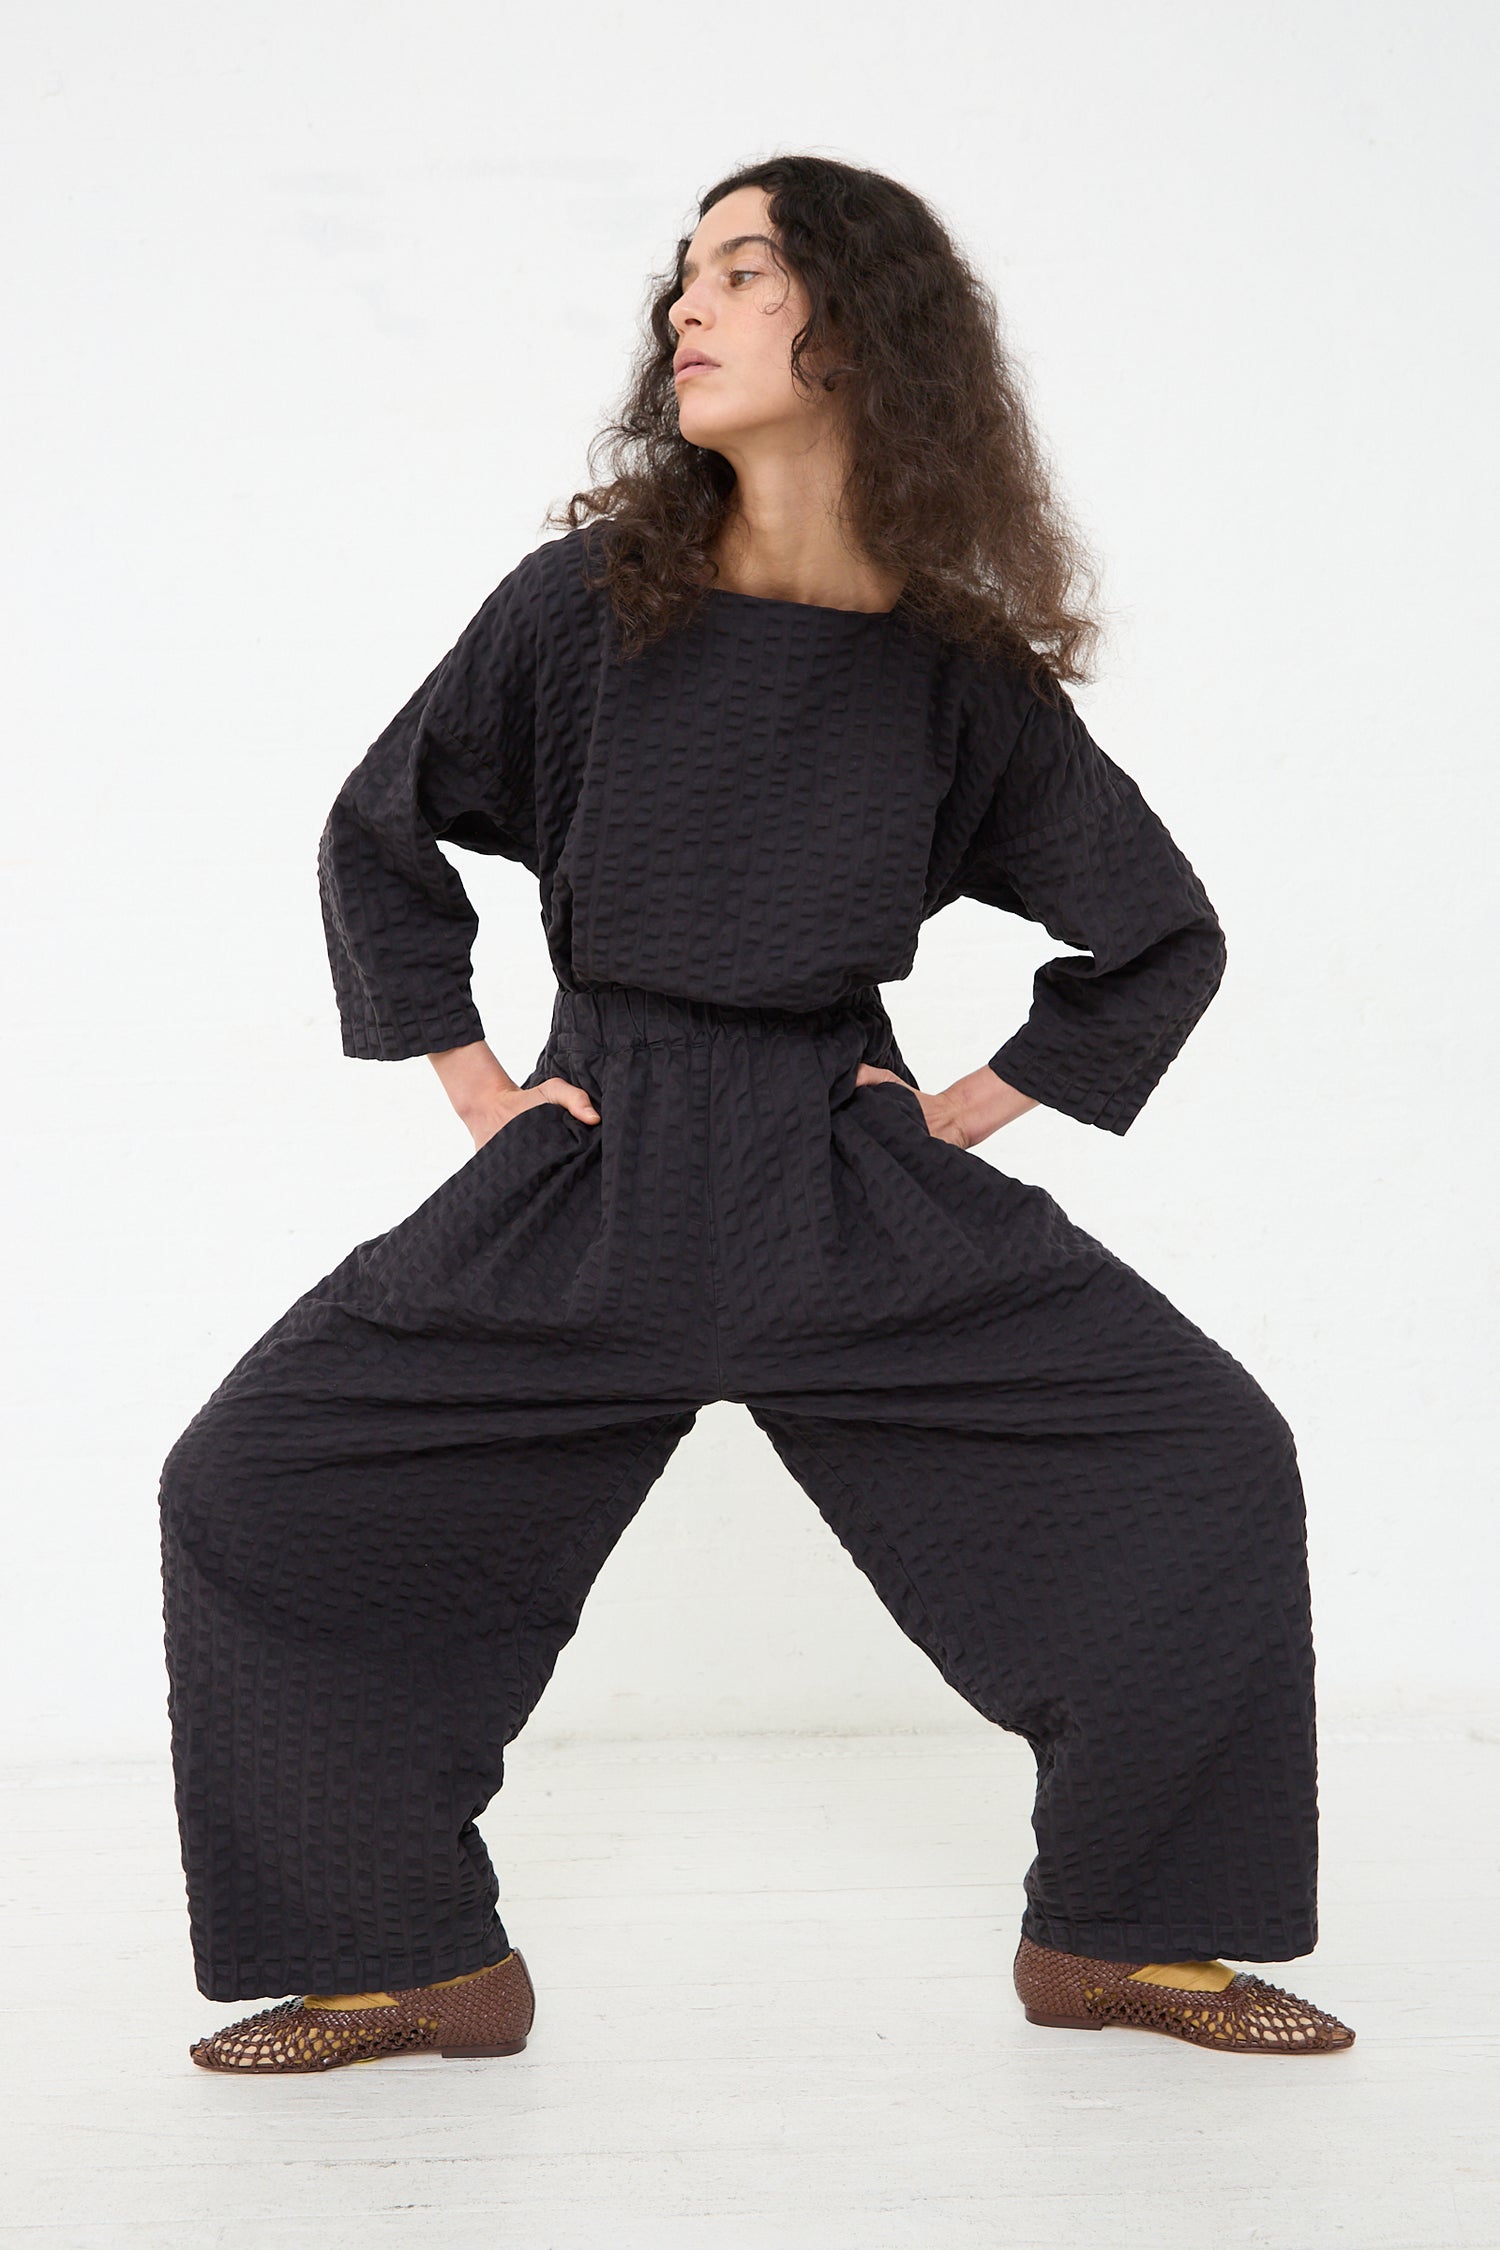 A person stands with hands on hips, wearing a textured Black Crane Cotton Seersucker Wide Pant in Ink Black jumpsuit and patterned flat shoes against a plain white background.